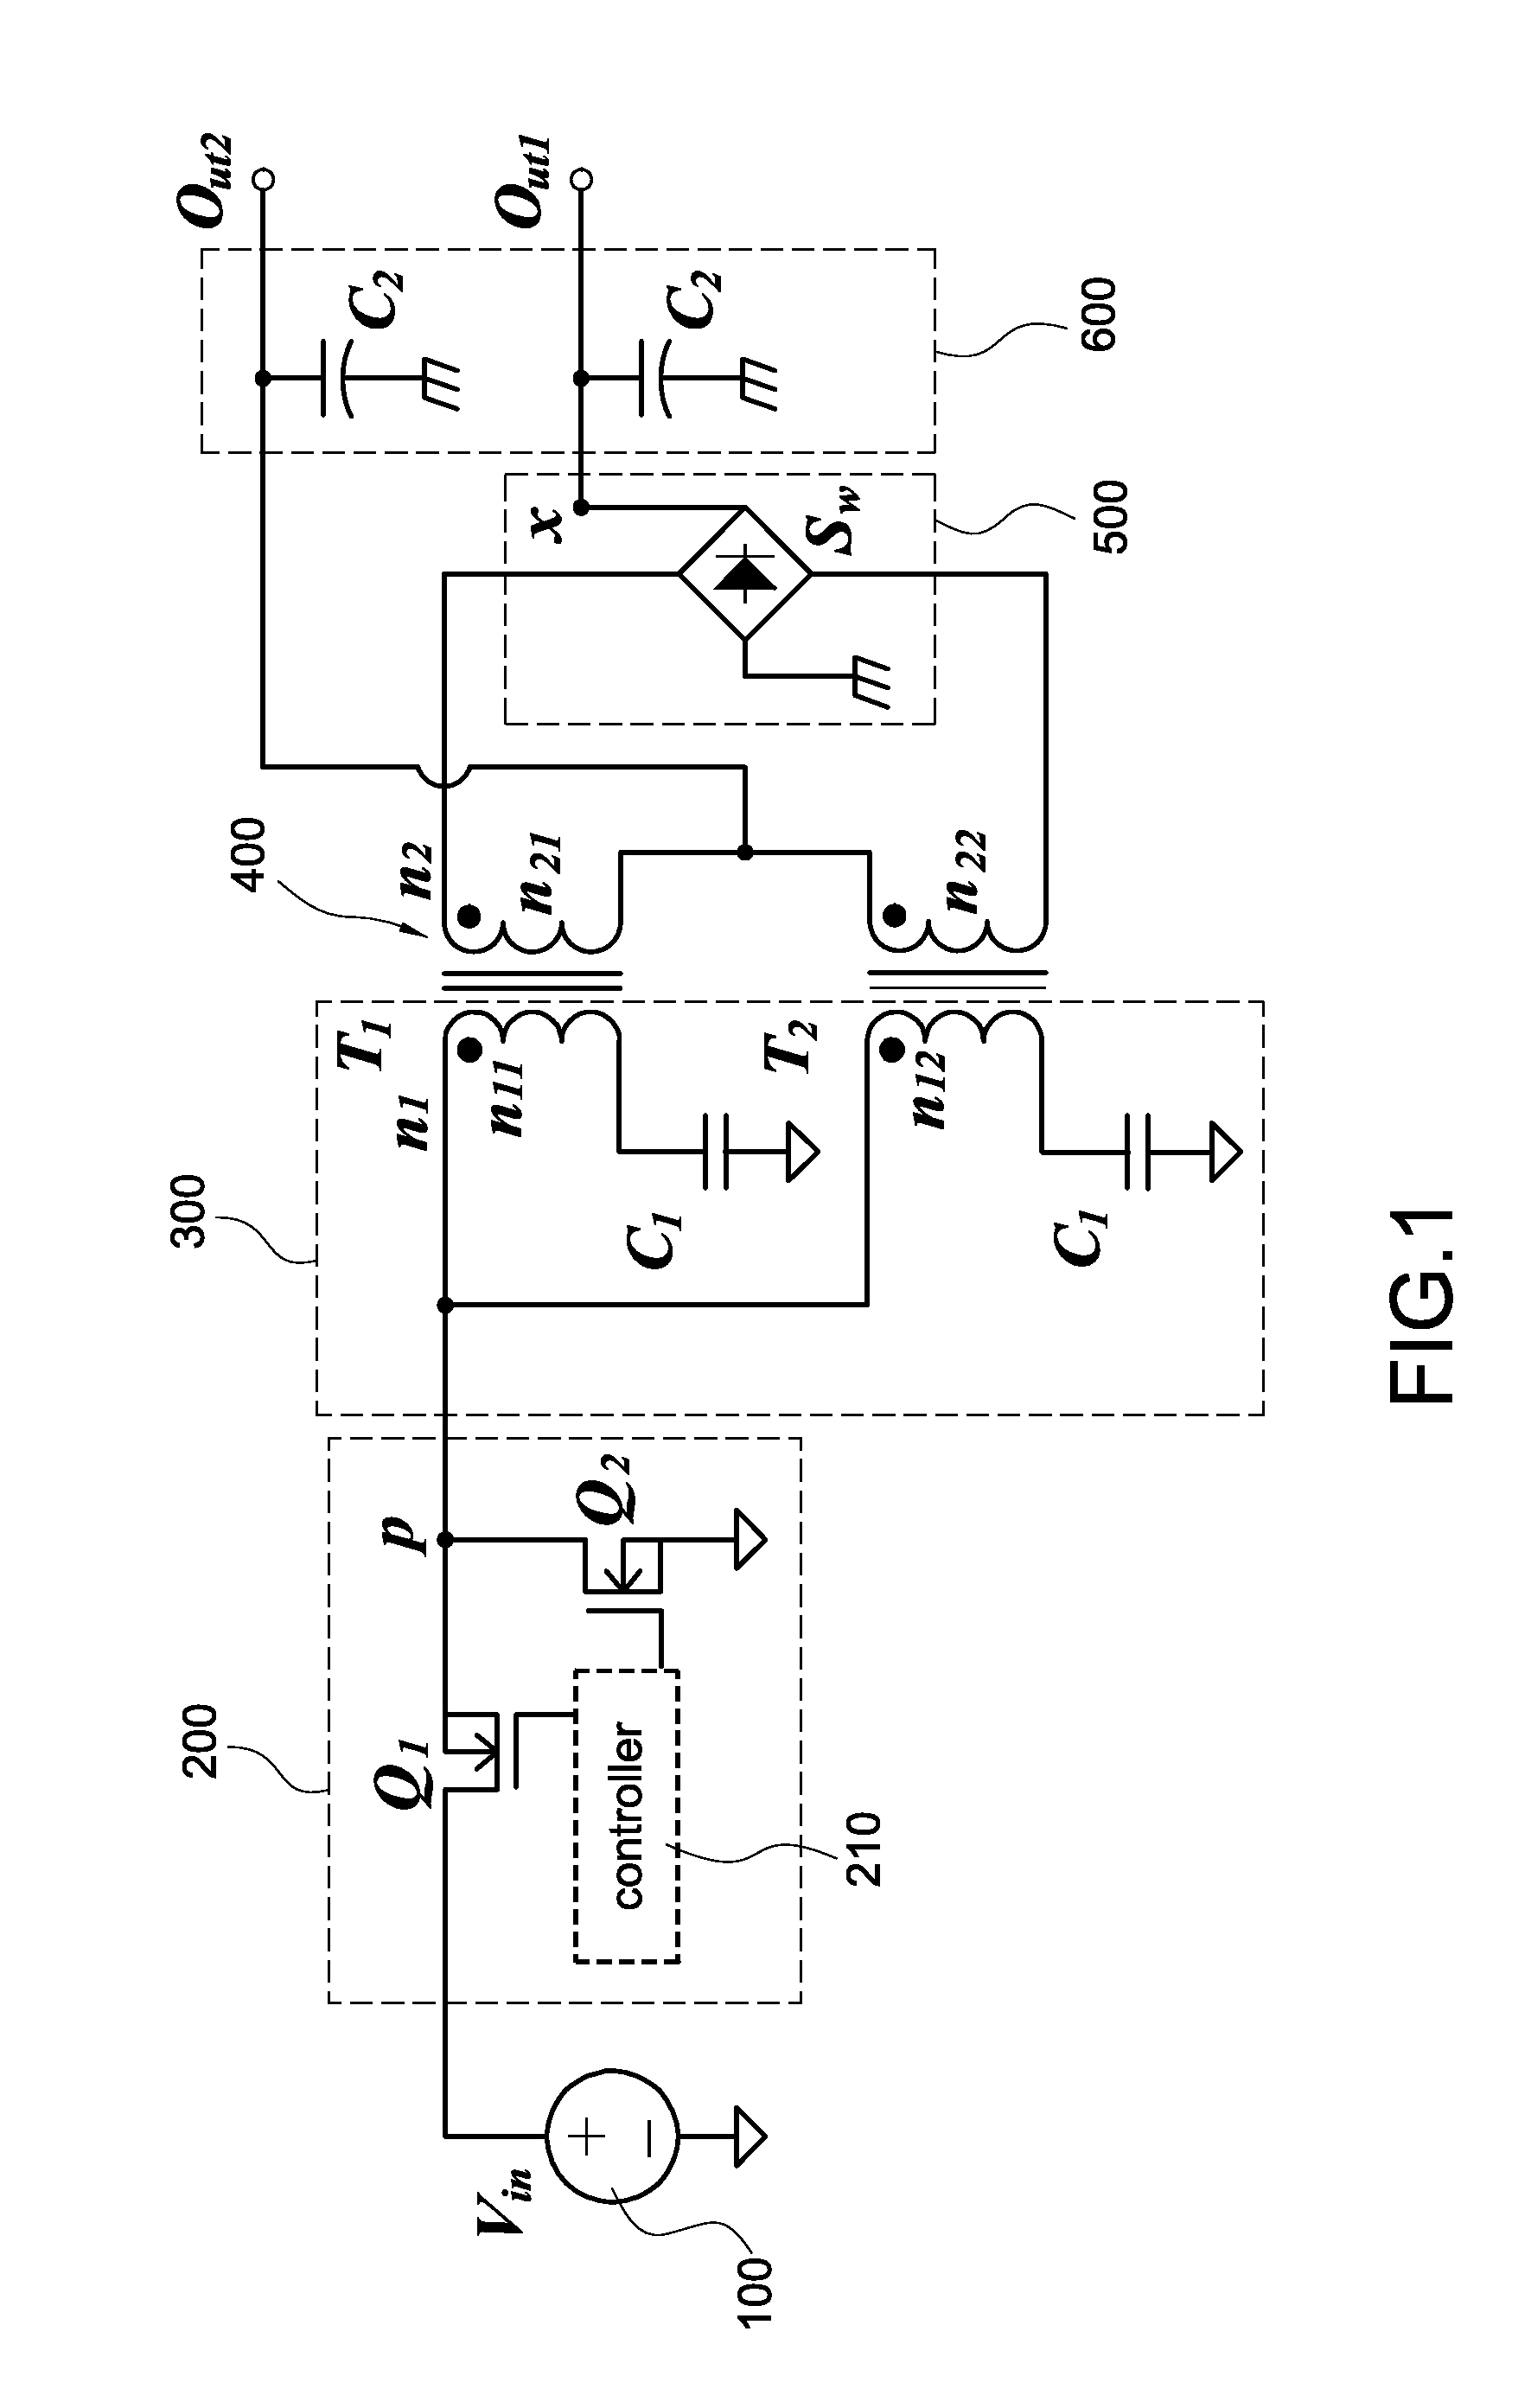 Current-sharing power supply apparatus